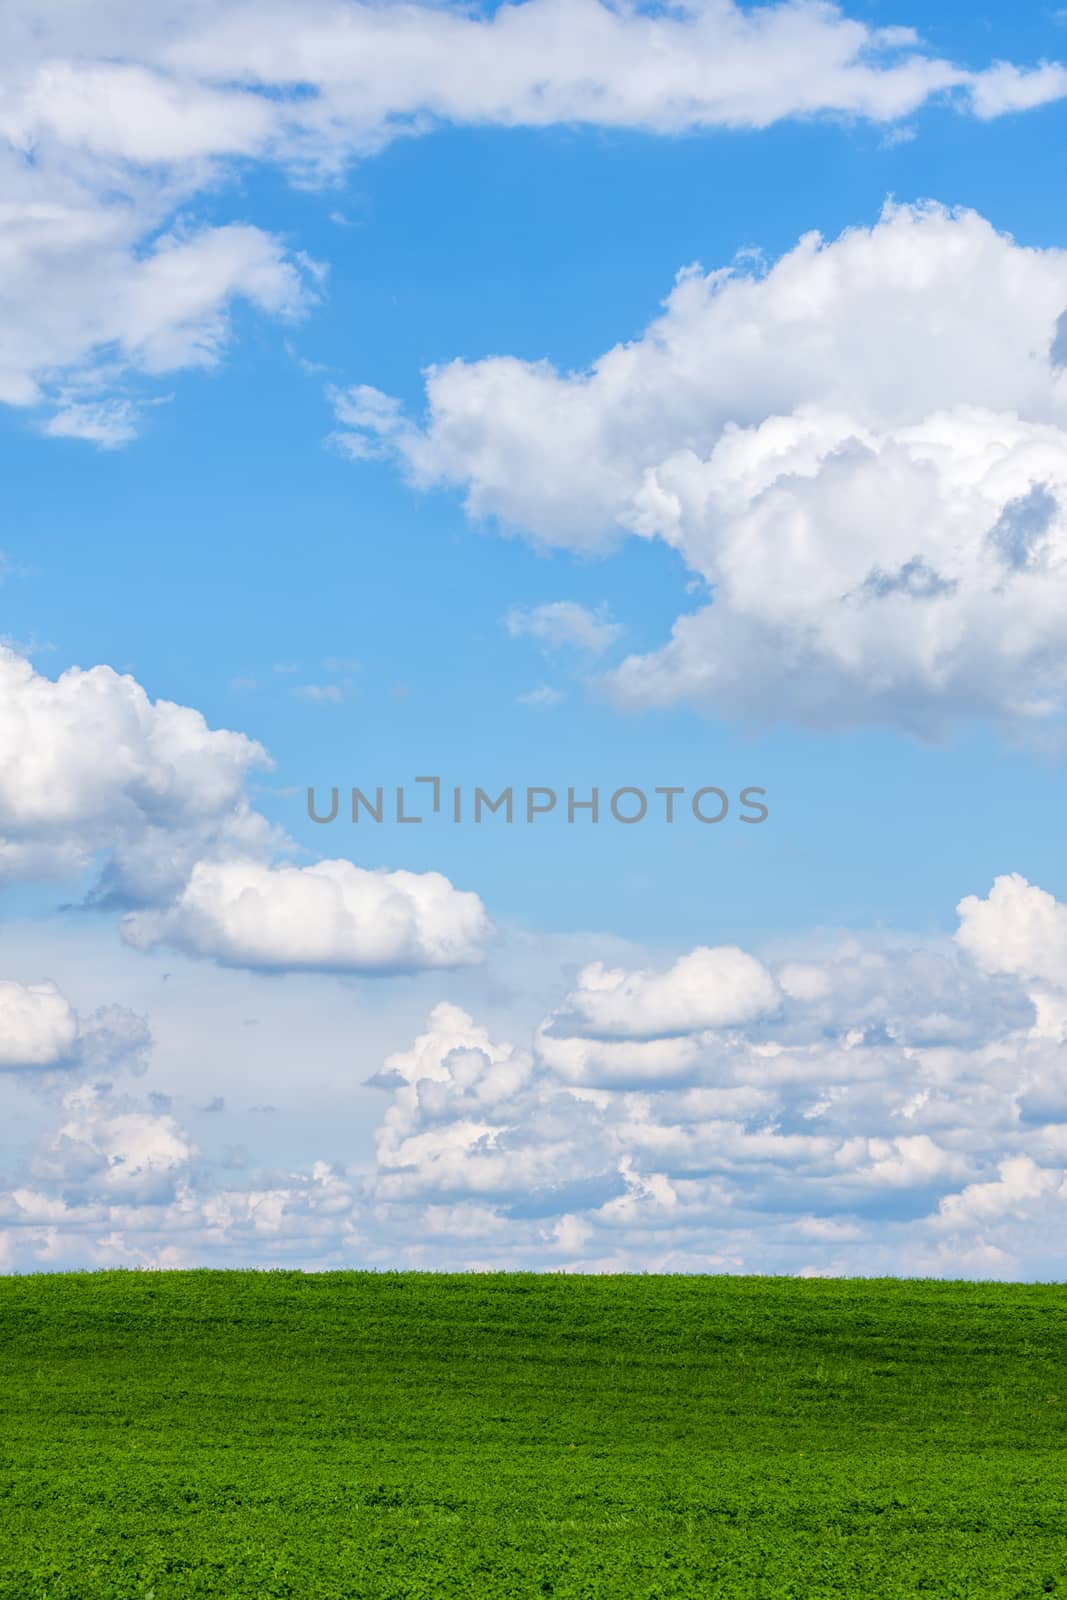 Beautiful green field with white clouds